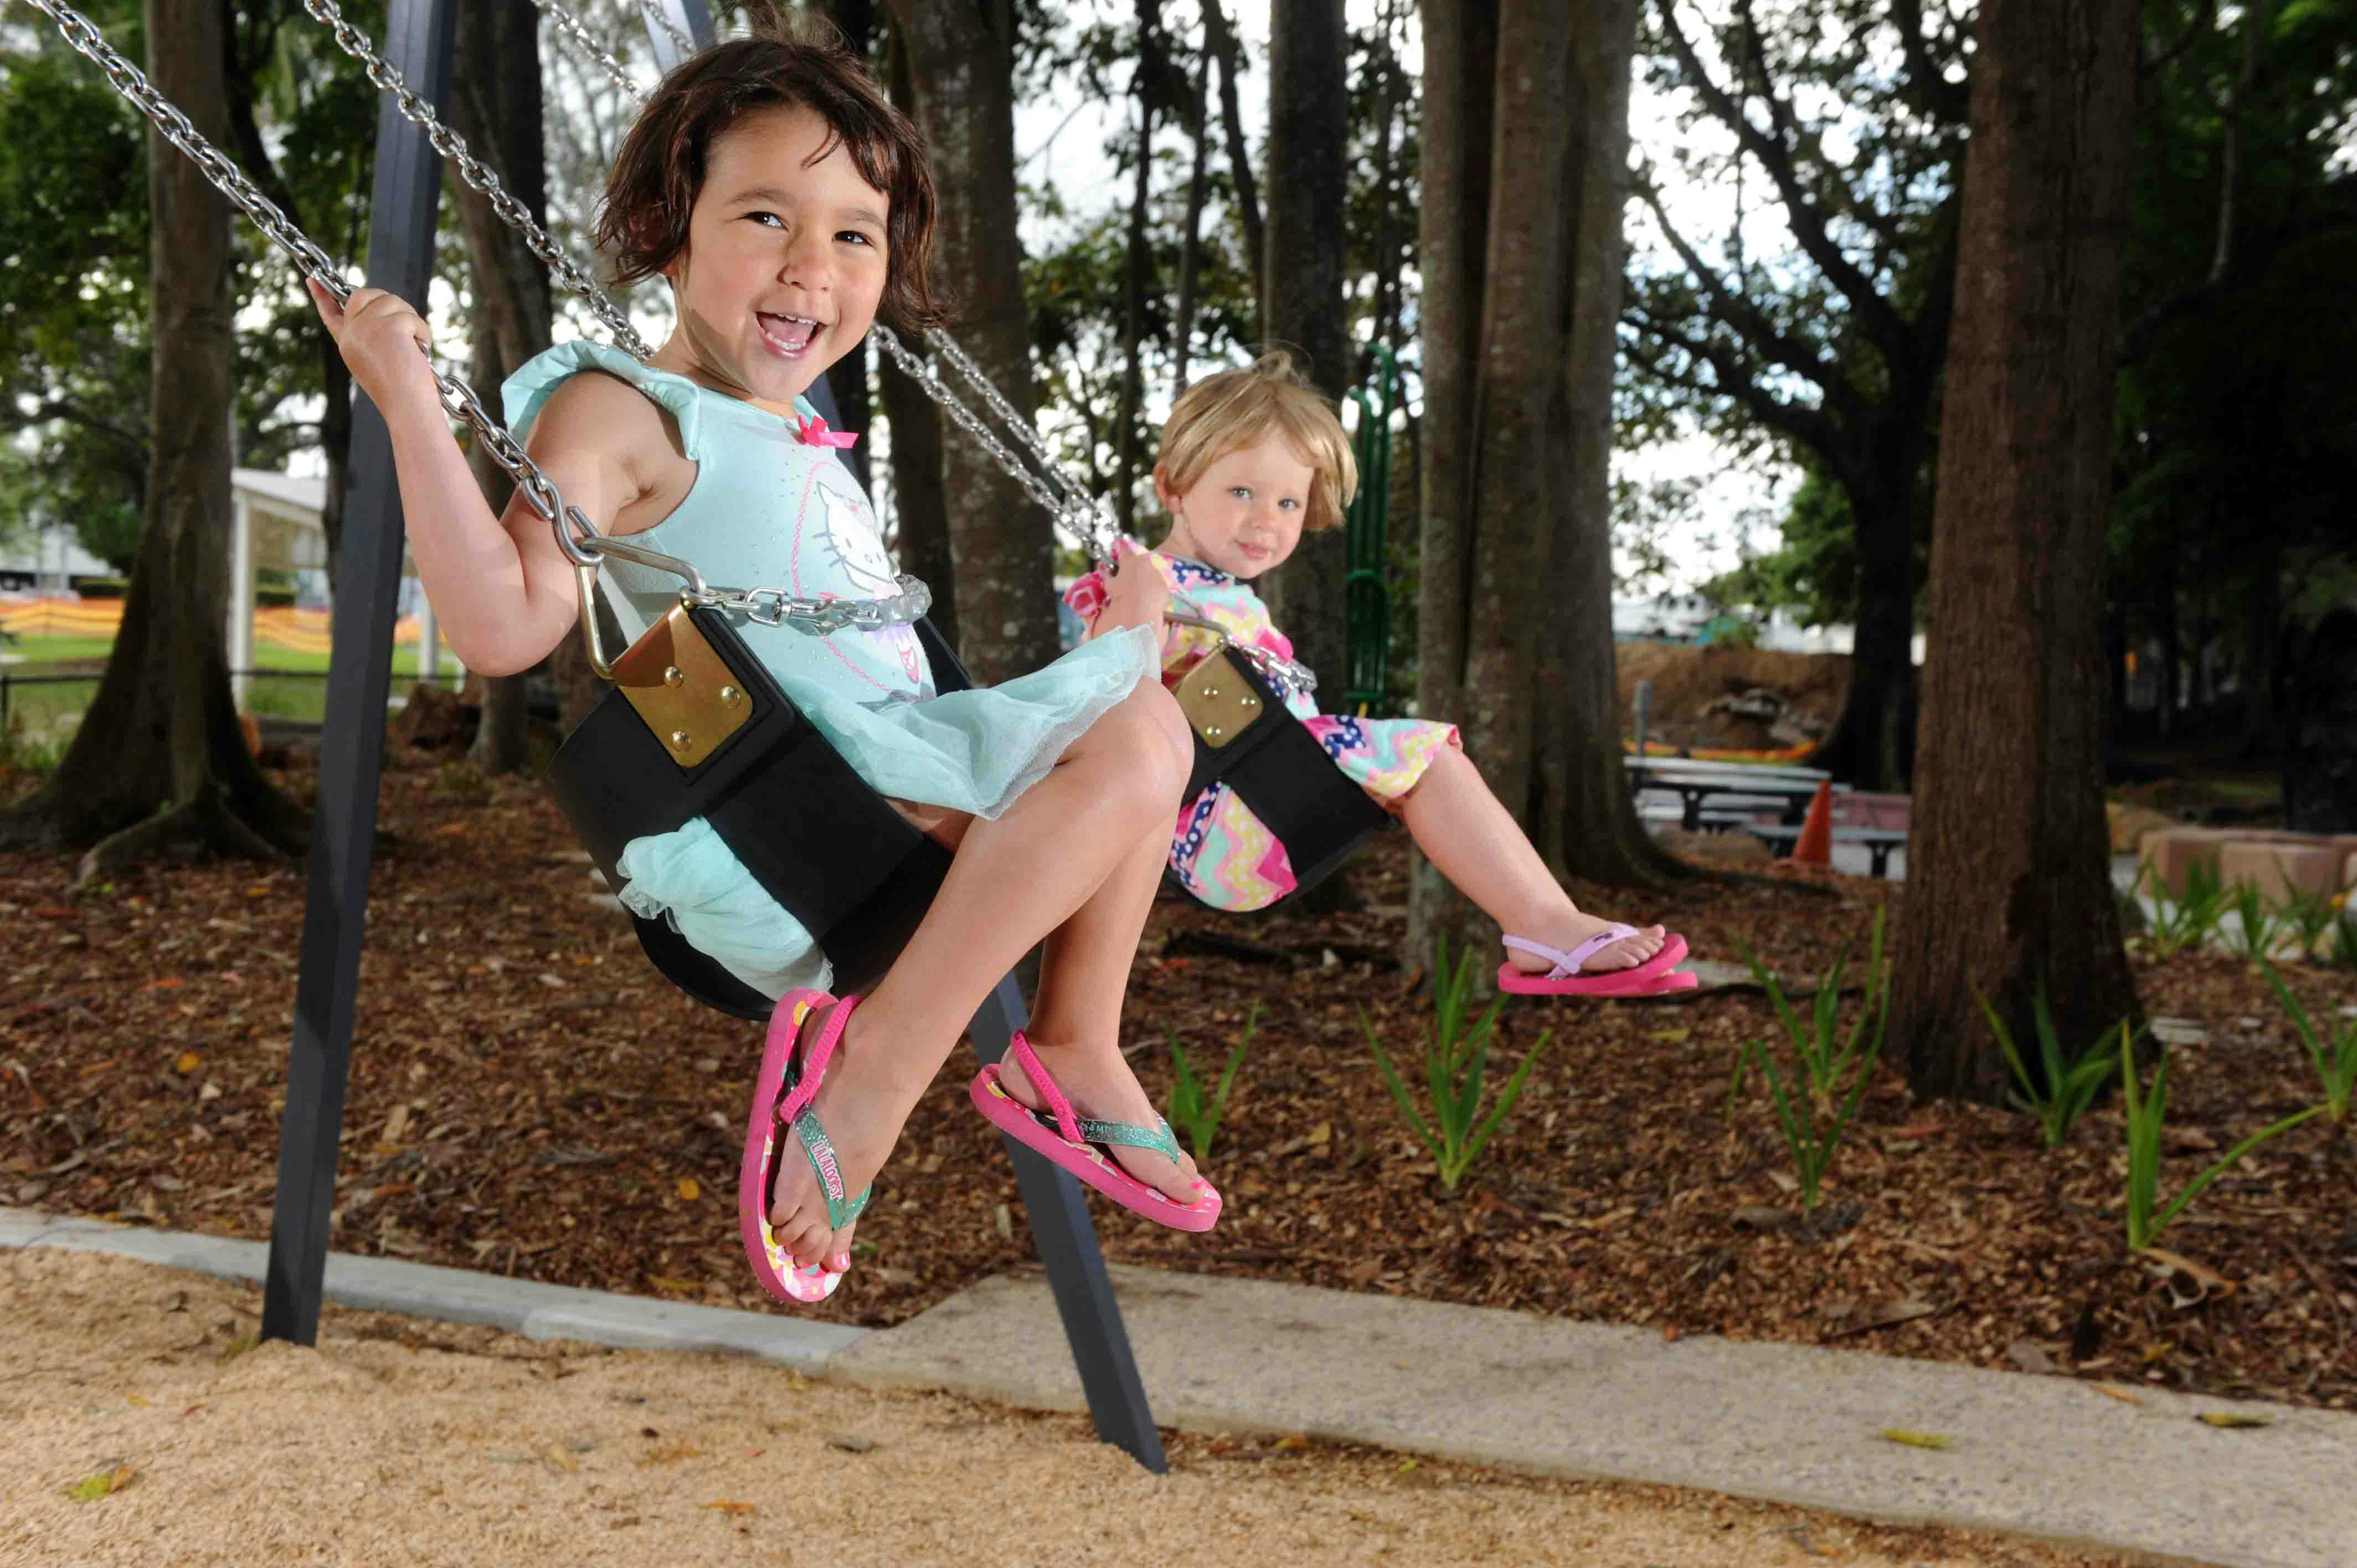 What would you like to see included in playgrounds in Tweed Shire?